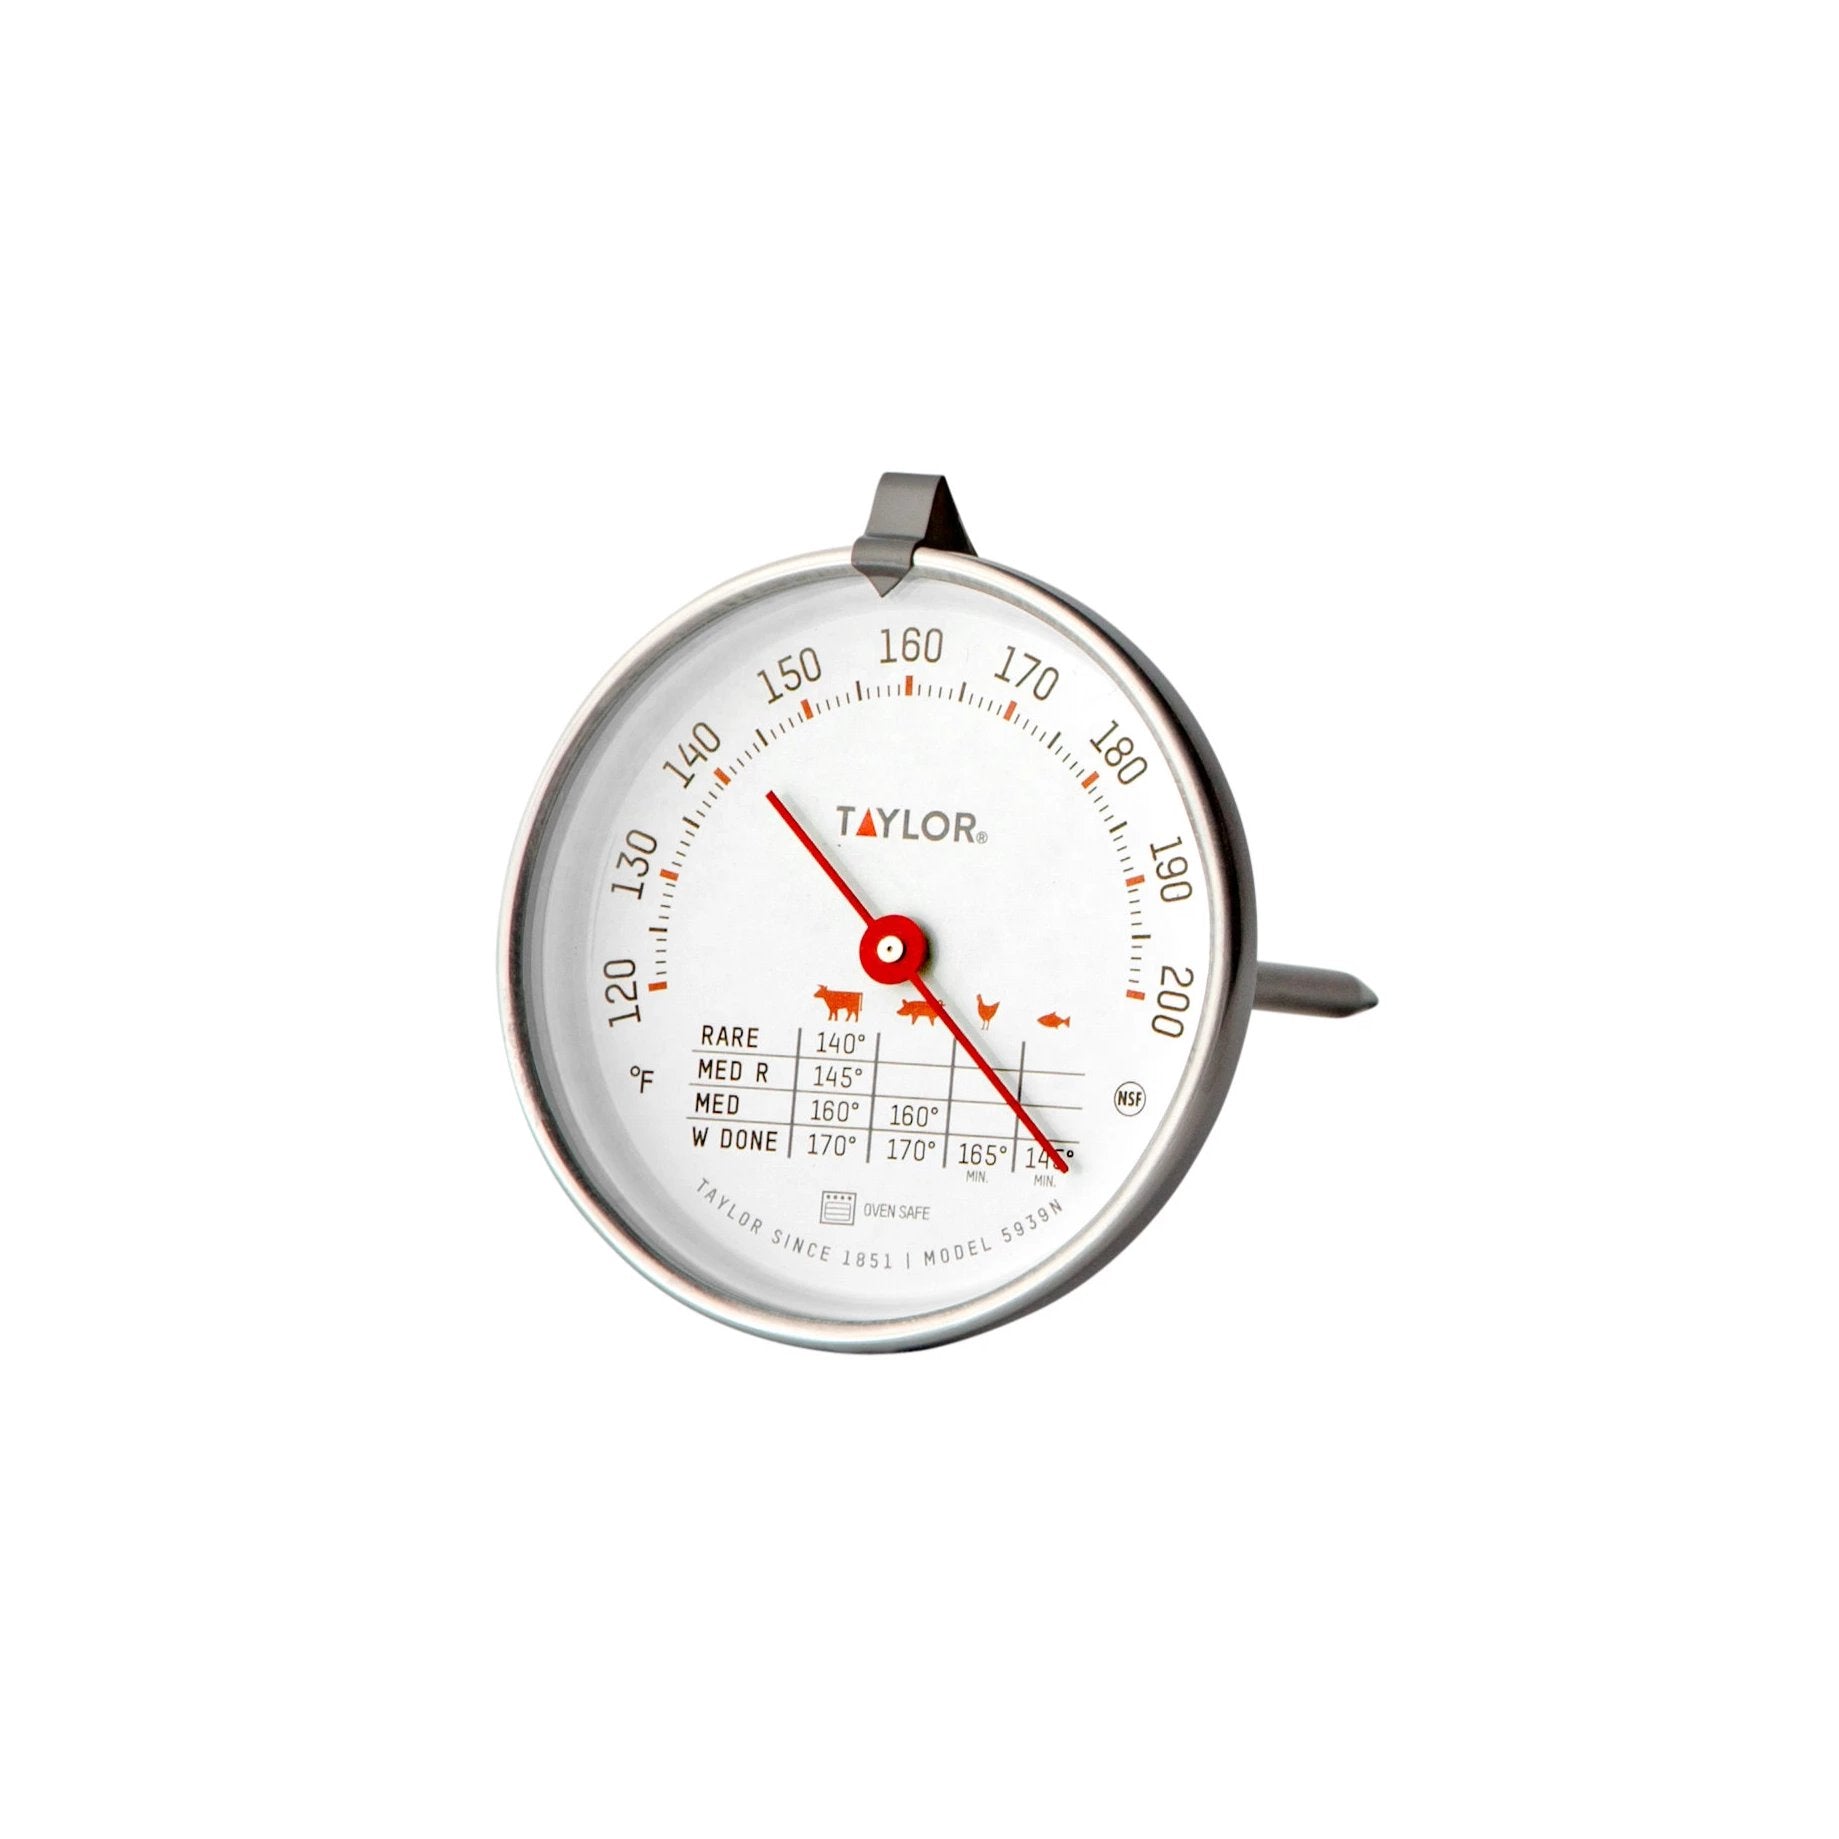 Taylor Classic Series Large Dial Oven Thermometer 